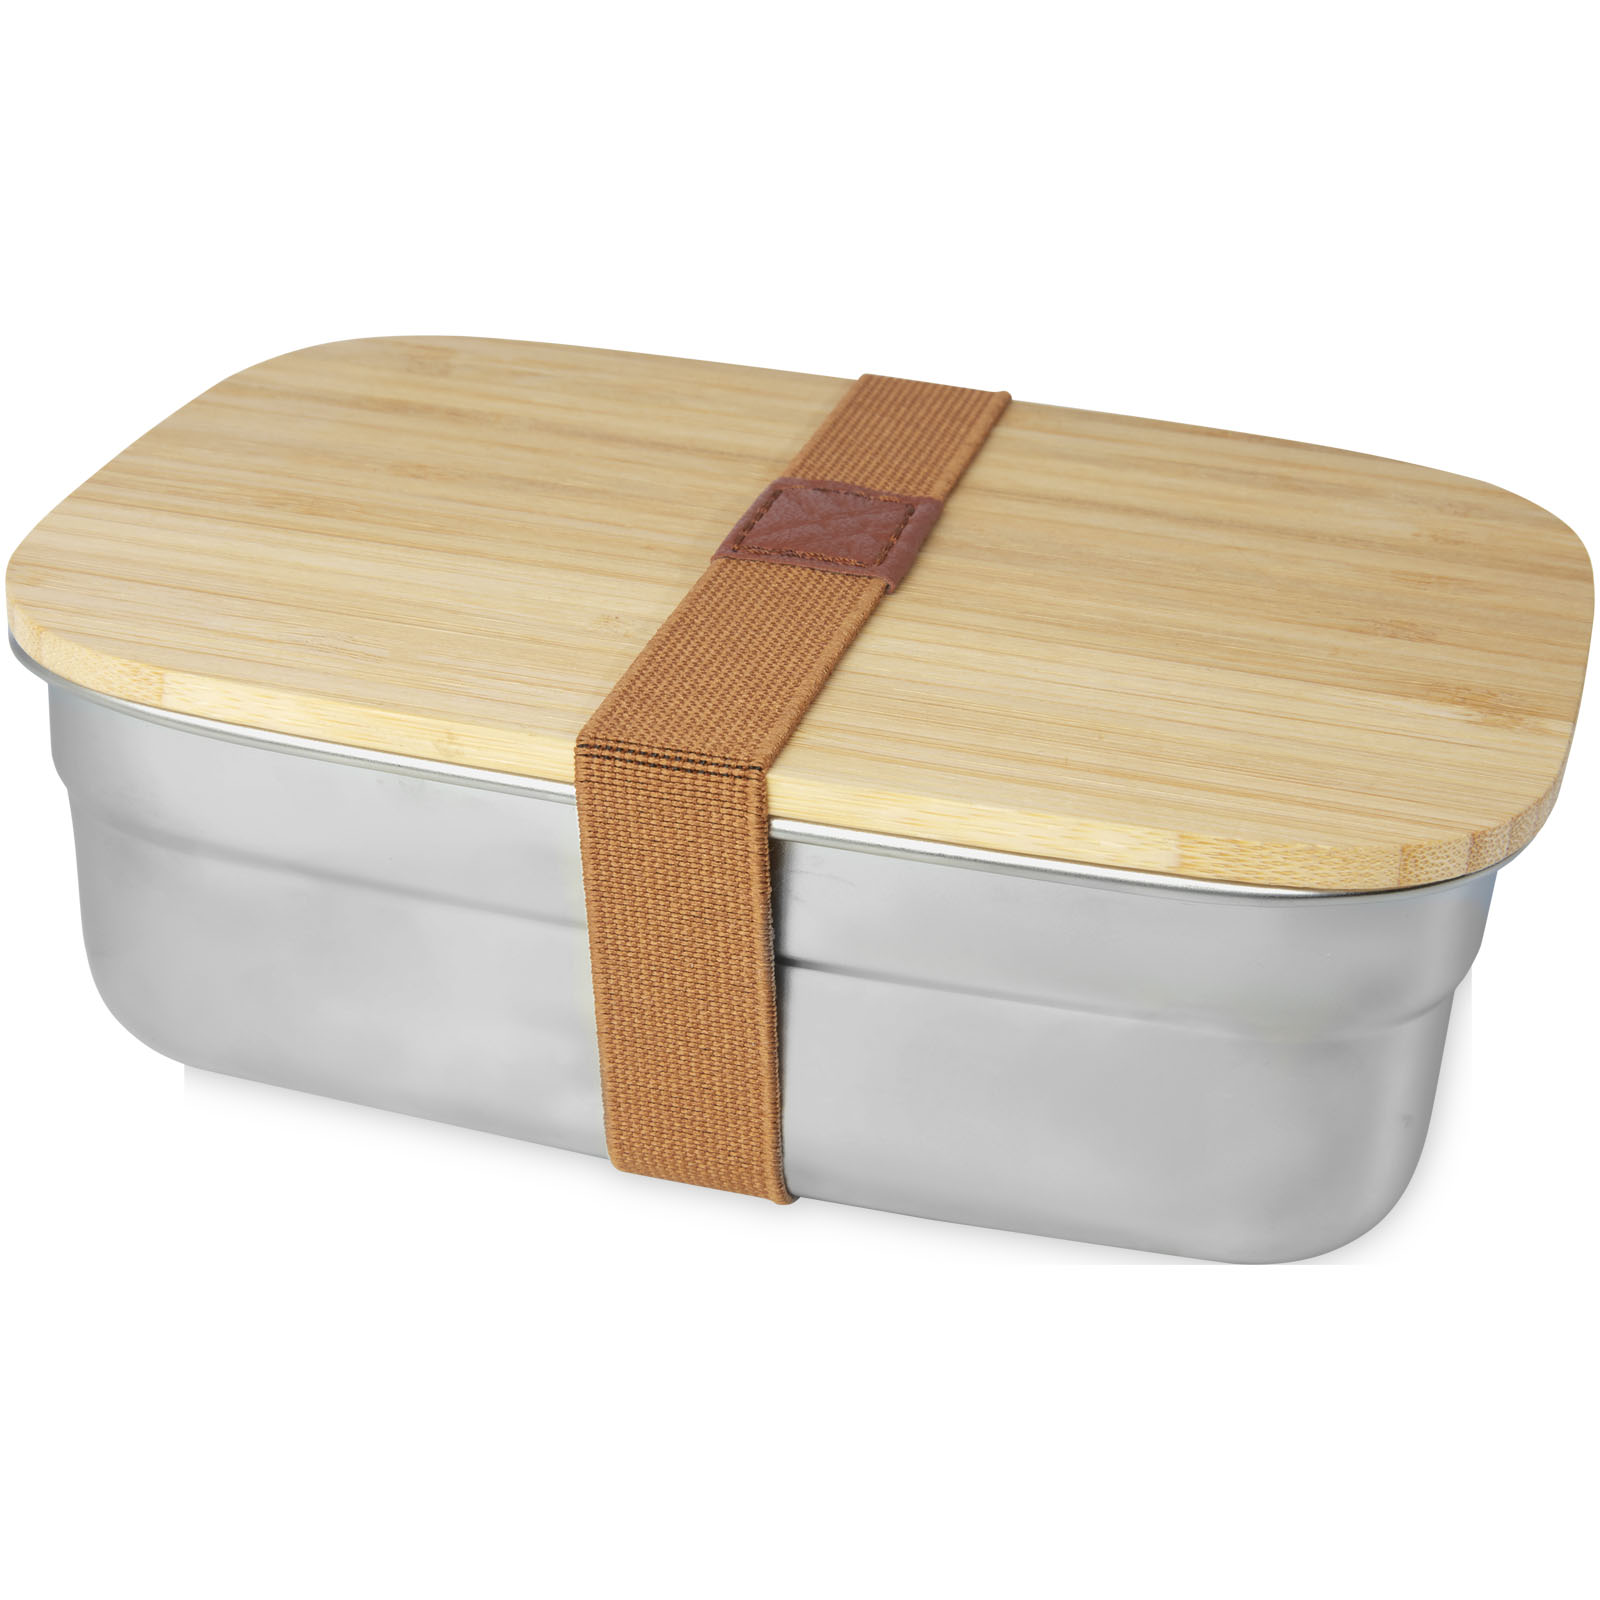 Advertising Lunch Boxes - Tite stainless steel lunch box with bamboo lid - 0